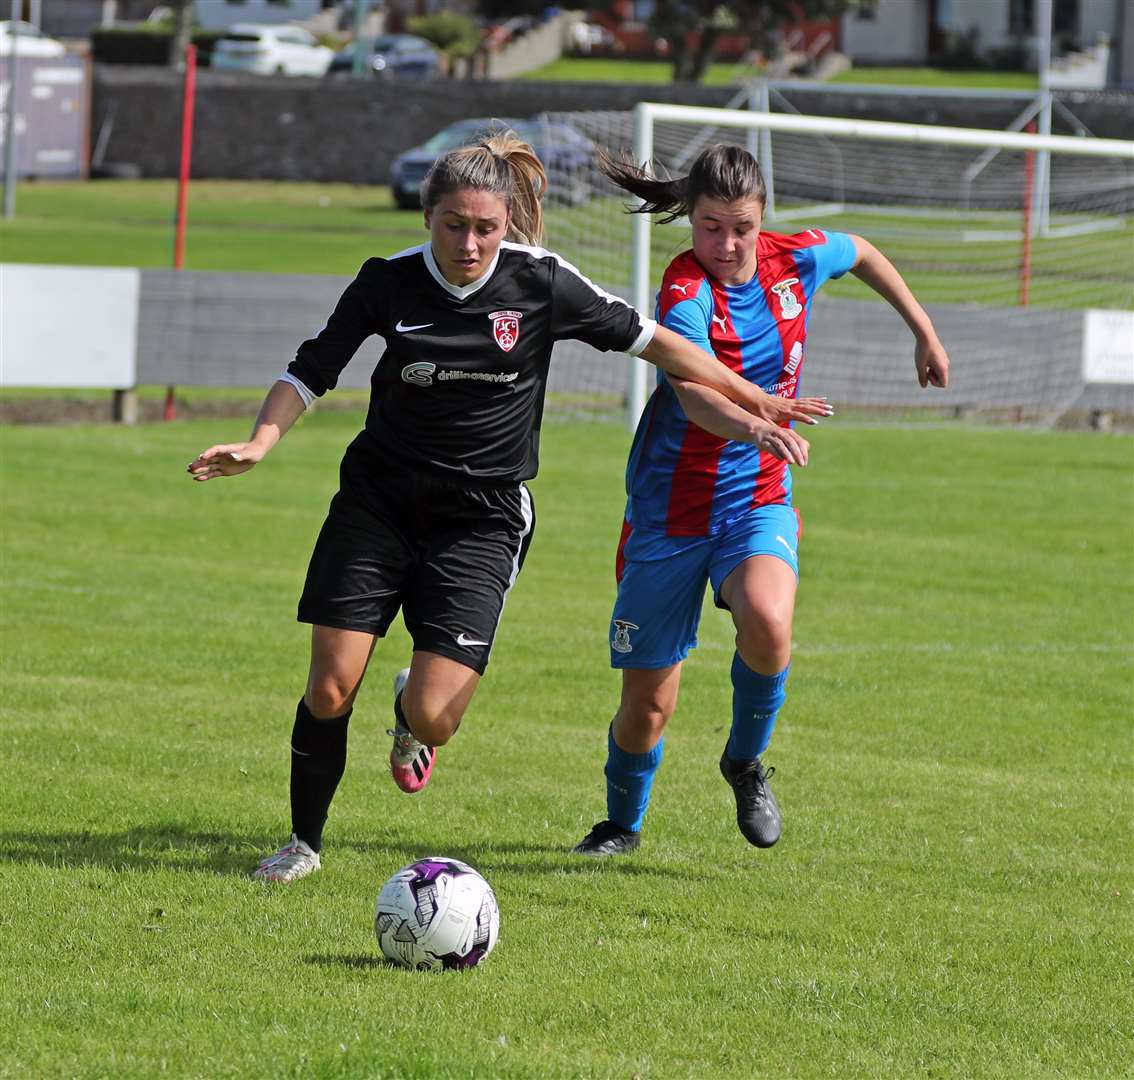 Caithness defender Sarah Henderson races clear of Maree Wood during a match against Inverness Caledonian Thistle Development earlier in the SWF Highlands and Islands League campaign. Picture: James Gunn